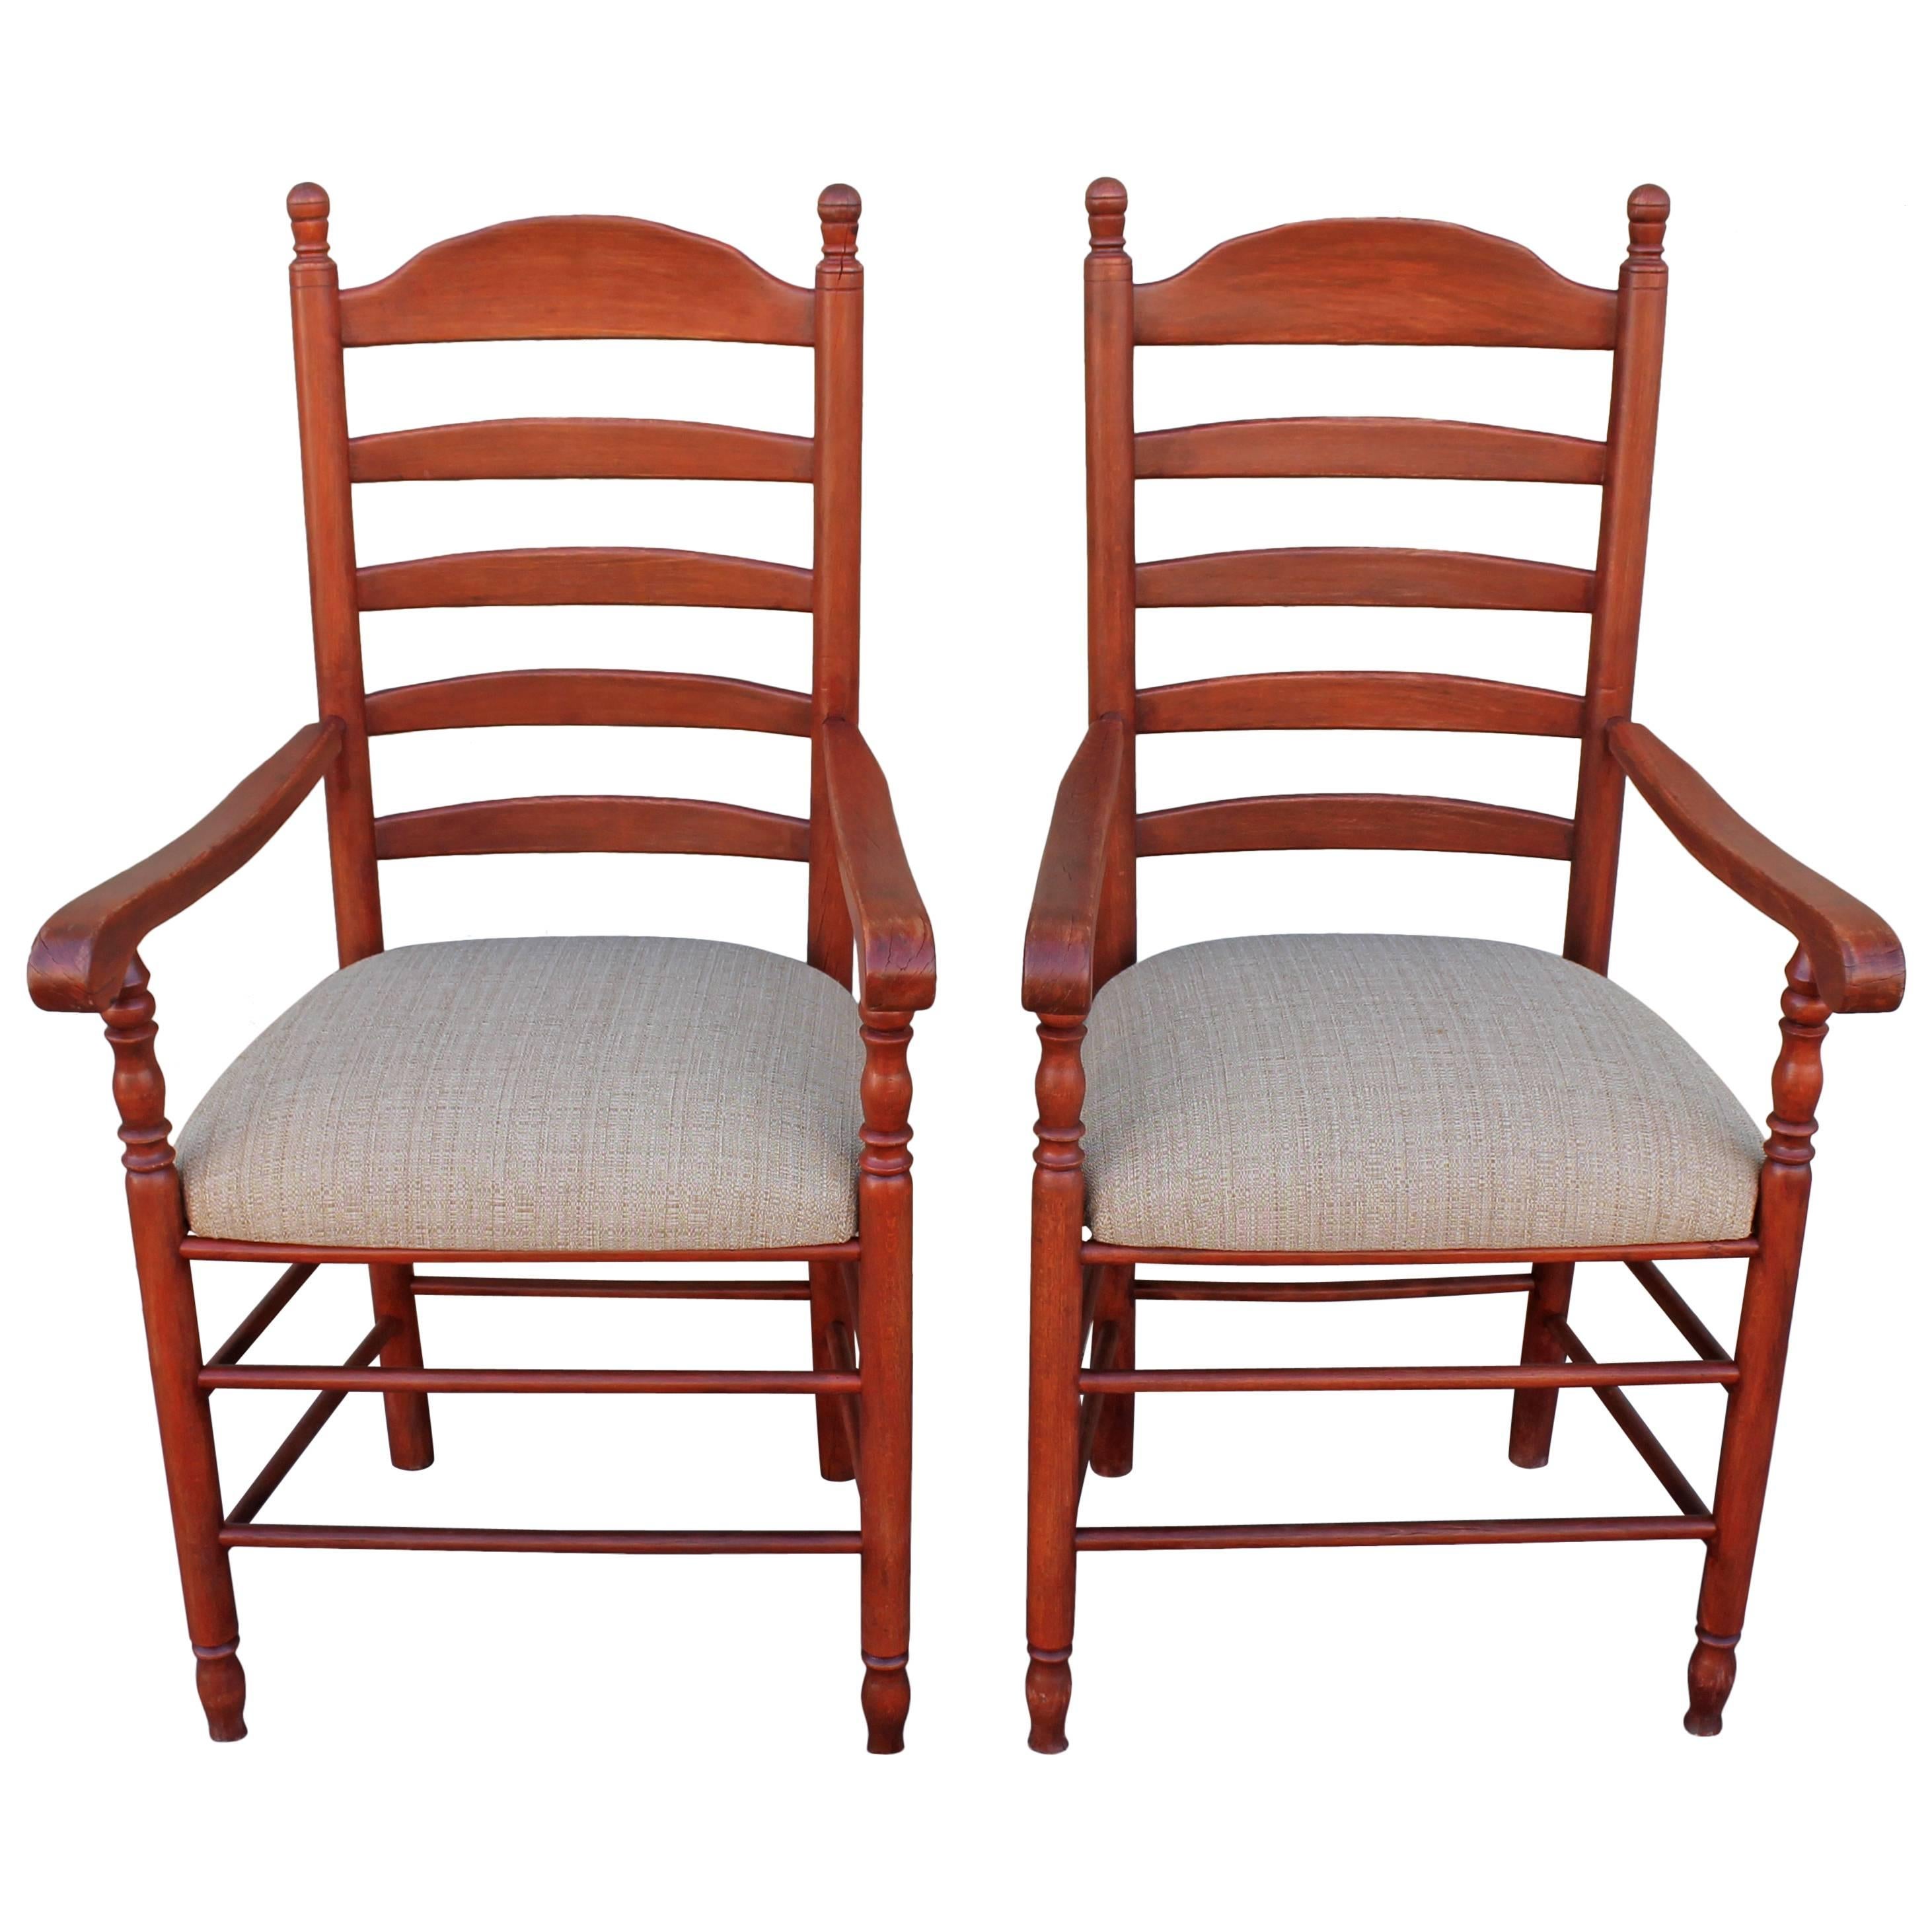 Matching Pair of 19th Century N.E. Red Painted Ladder Back Arm Chairs